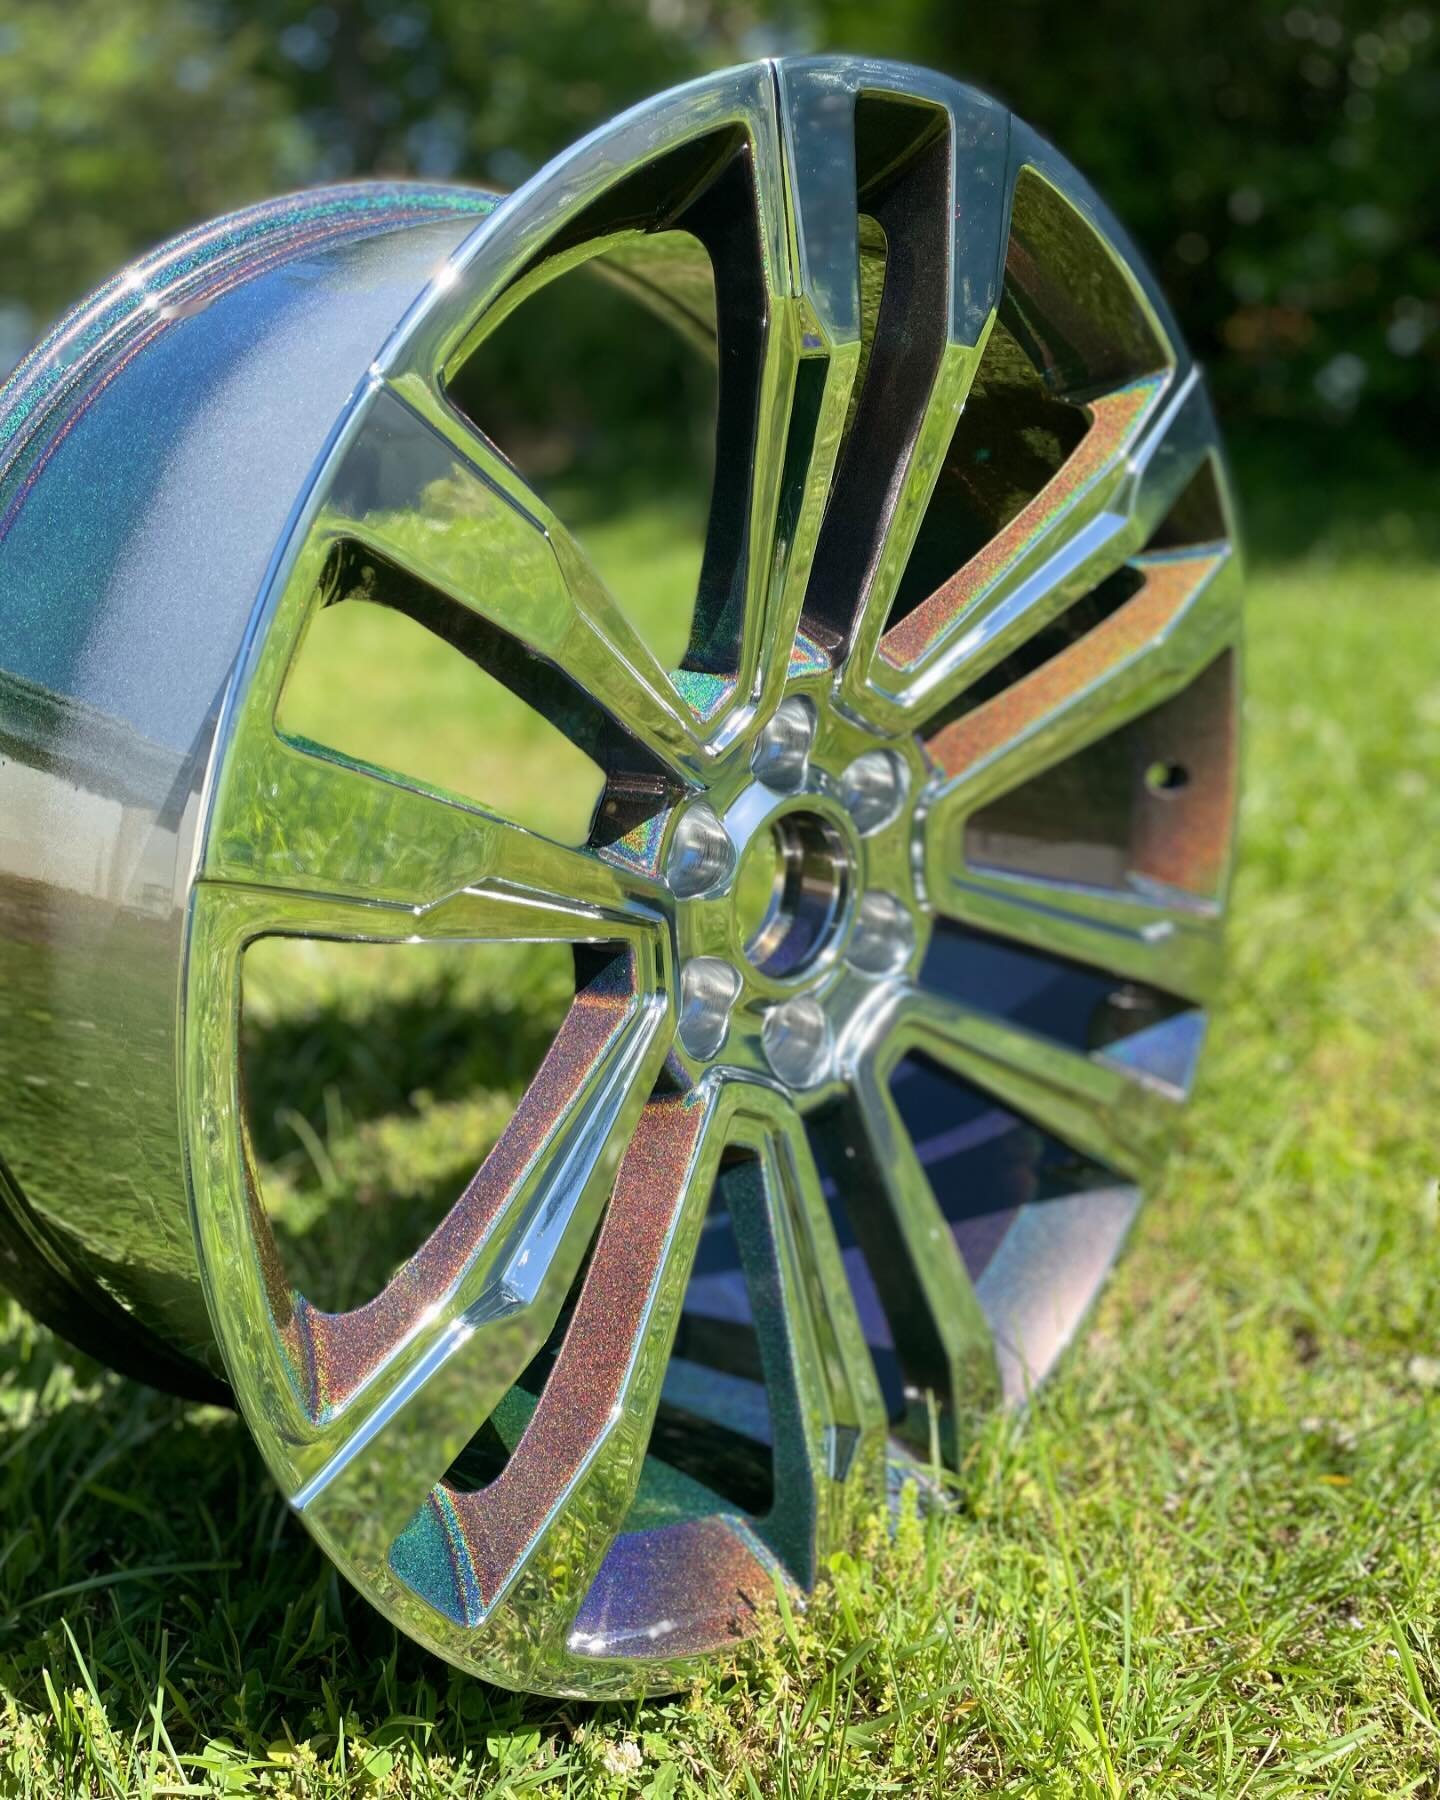 New CV44 24x10 wheels from @oewheels for the shop truck are 🔥🔥🔥 chrome faces with @prismaticpowders prismatic universe windows and barrels 🤘🤘
.
.
.
.
#oewheels #powdercoating #powdercoated #powdercoatedwheels #custom #split6 #shoptruck #showtruc